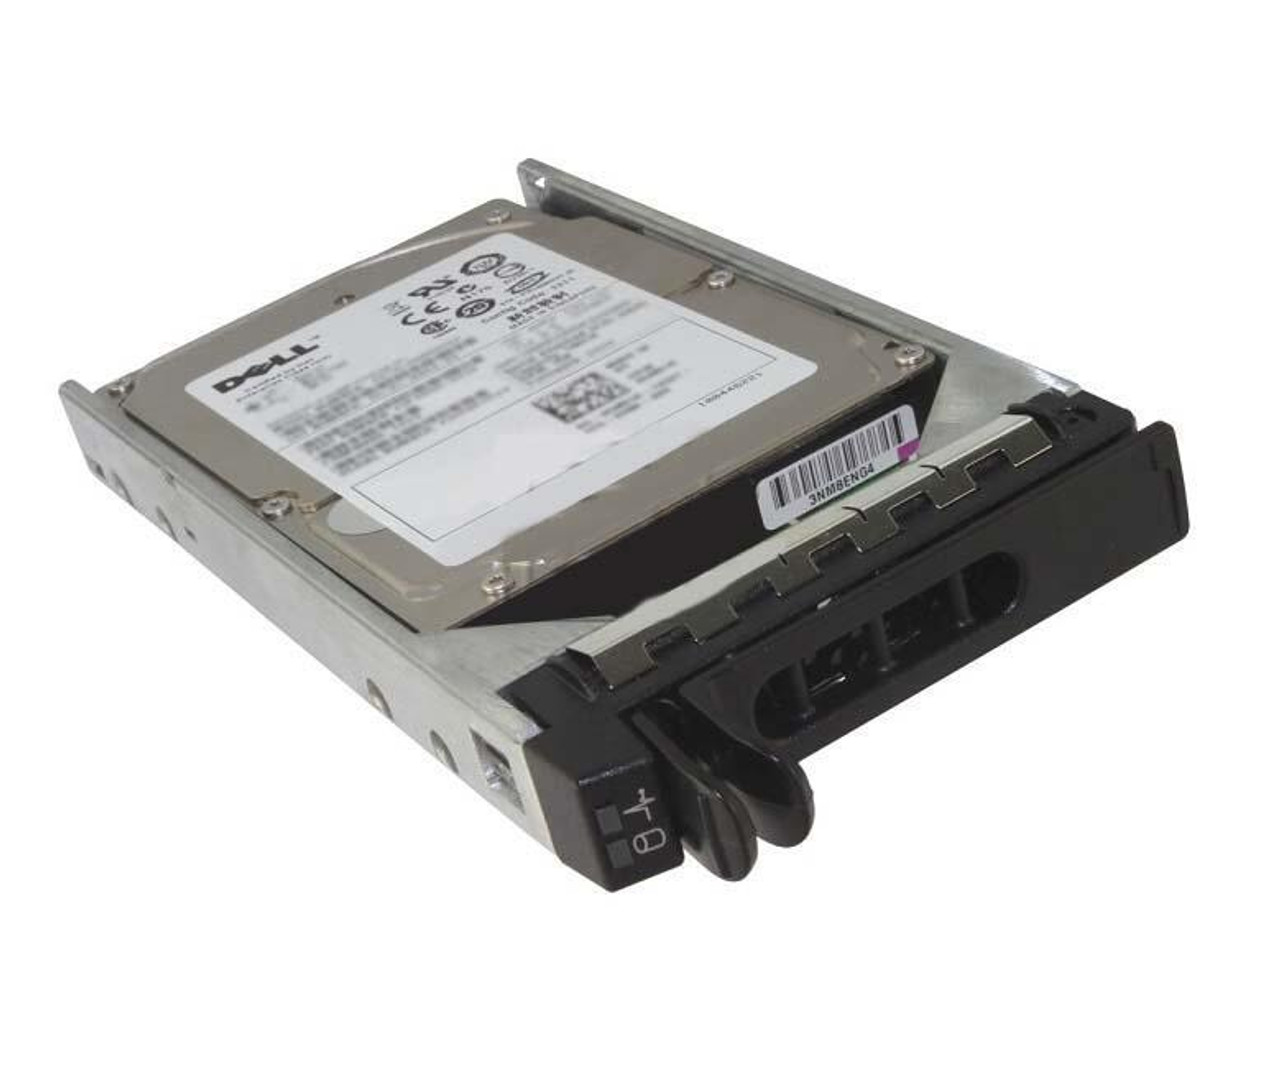 09T597 Dell 73GB 10000RPM Ultra-320 SCSI 80-Pin Hot Swap 8MB Cache 3.5-inch Internal Hard Drive with Tray